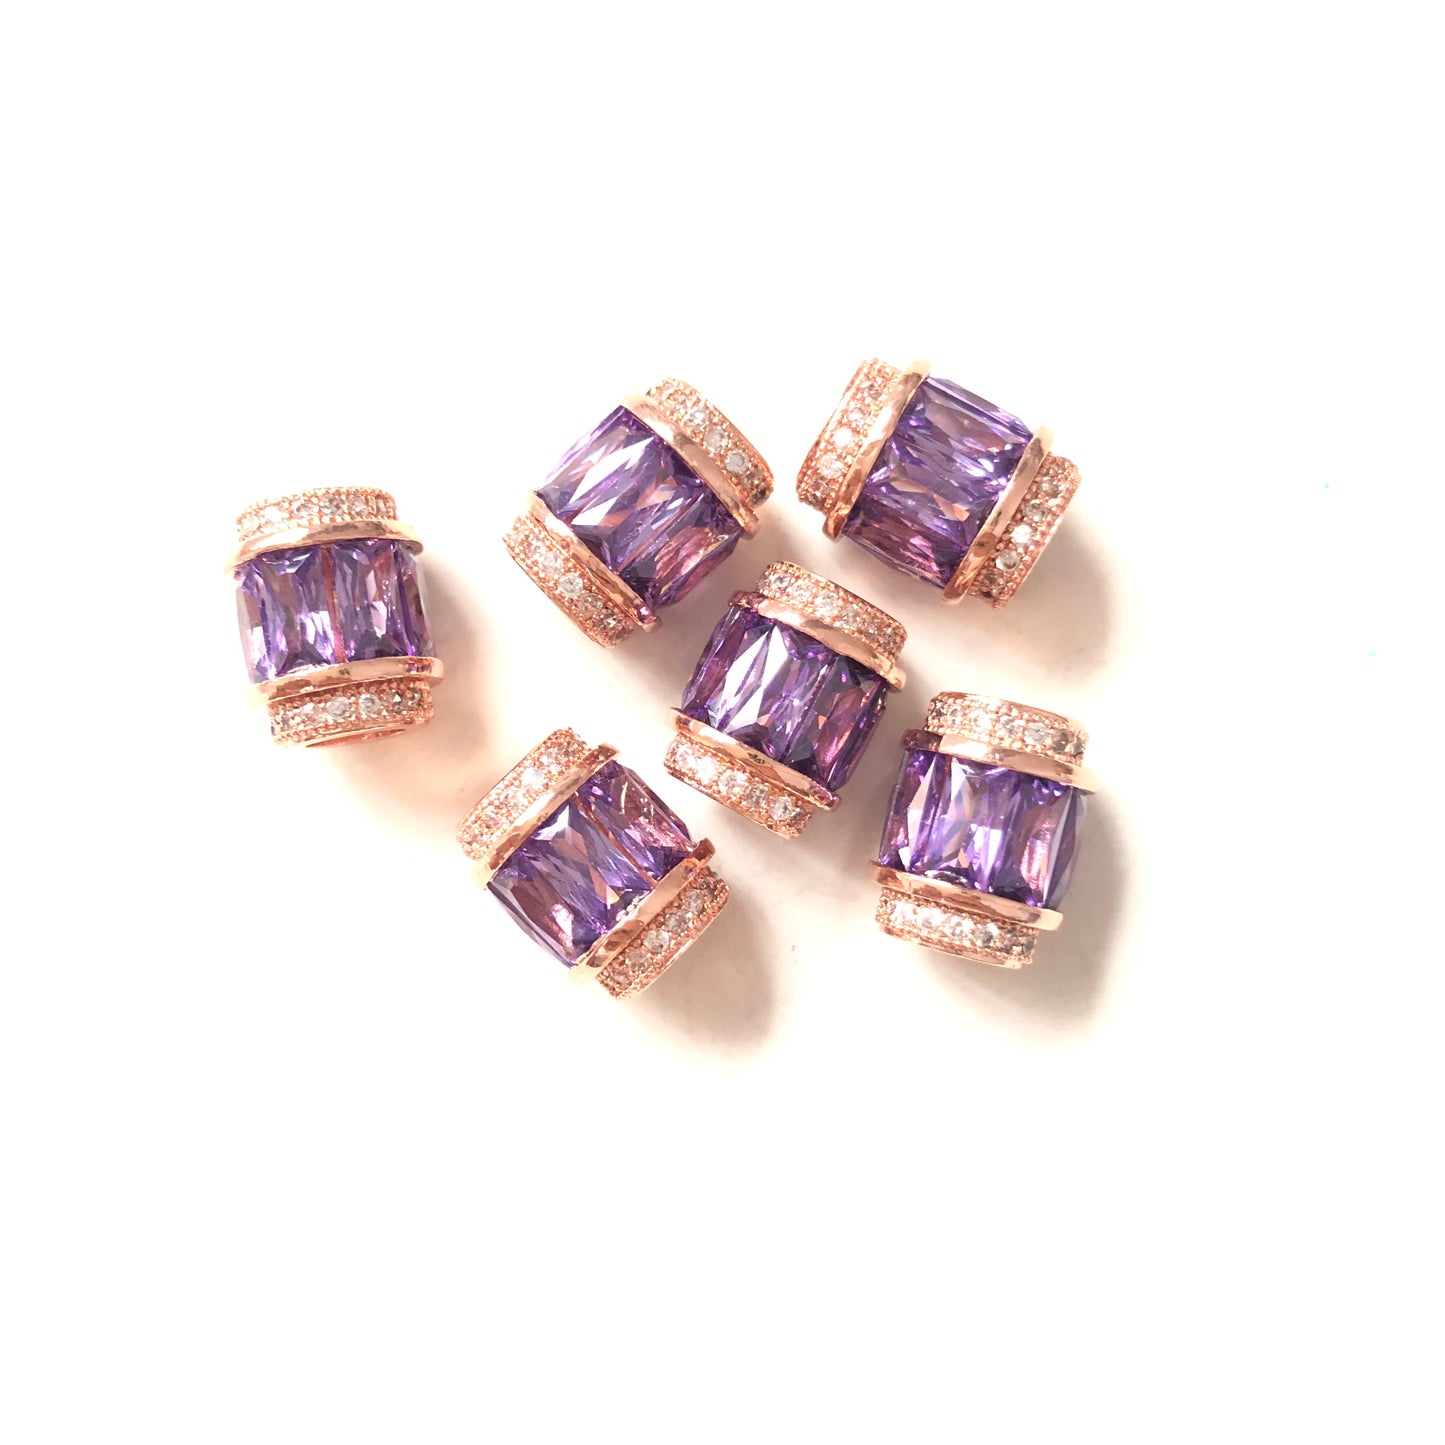 10pcs/lot 12*10mm Purple CZ Paved Big Hole Spacers Rose Gold CZ Paved Spacers Big Hole Beads New Spacers Arrivals Charms Beads Beyond